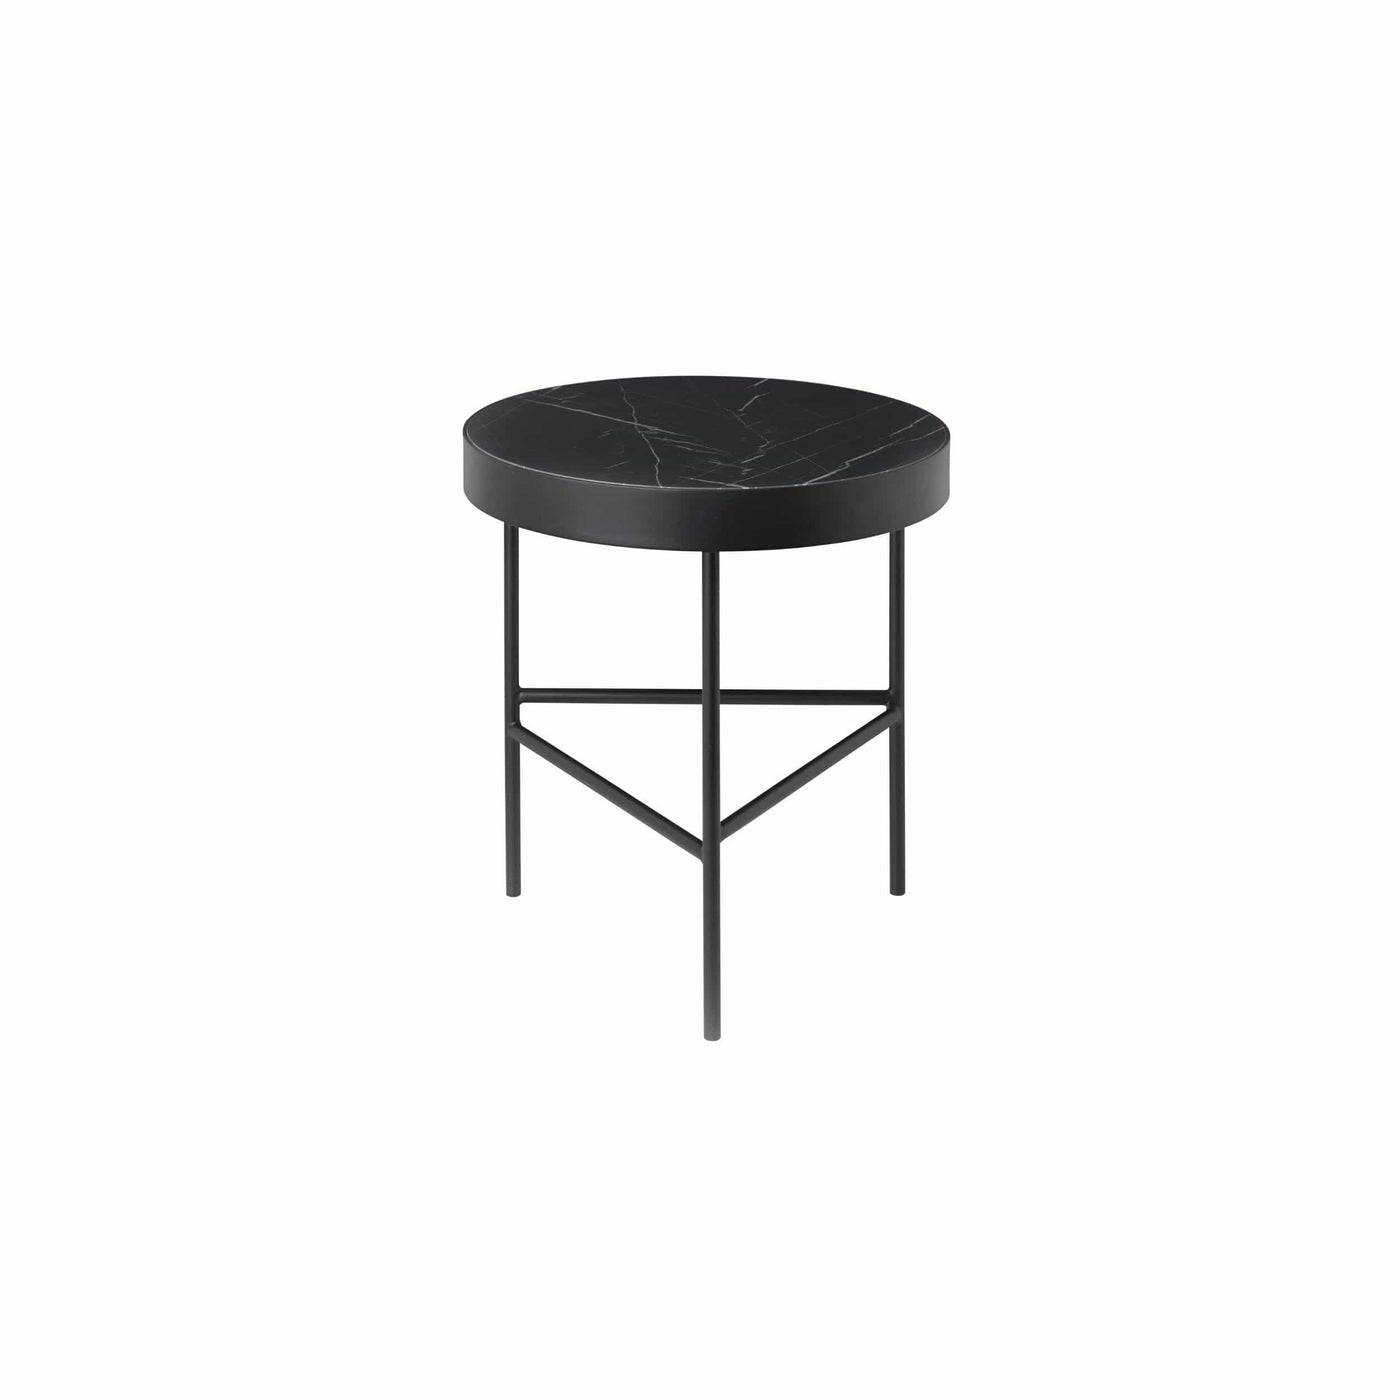 black marble table from Ferm living with beautiful solid marble top and sleek powder coated frame. Shop online at someday designs. #colour_black